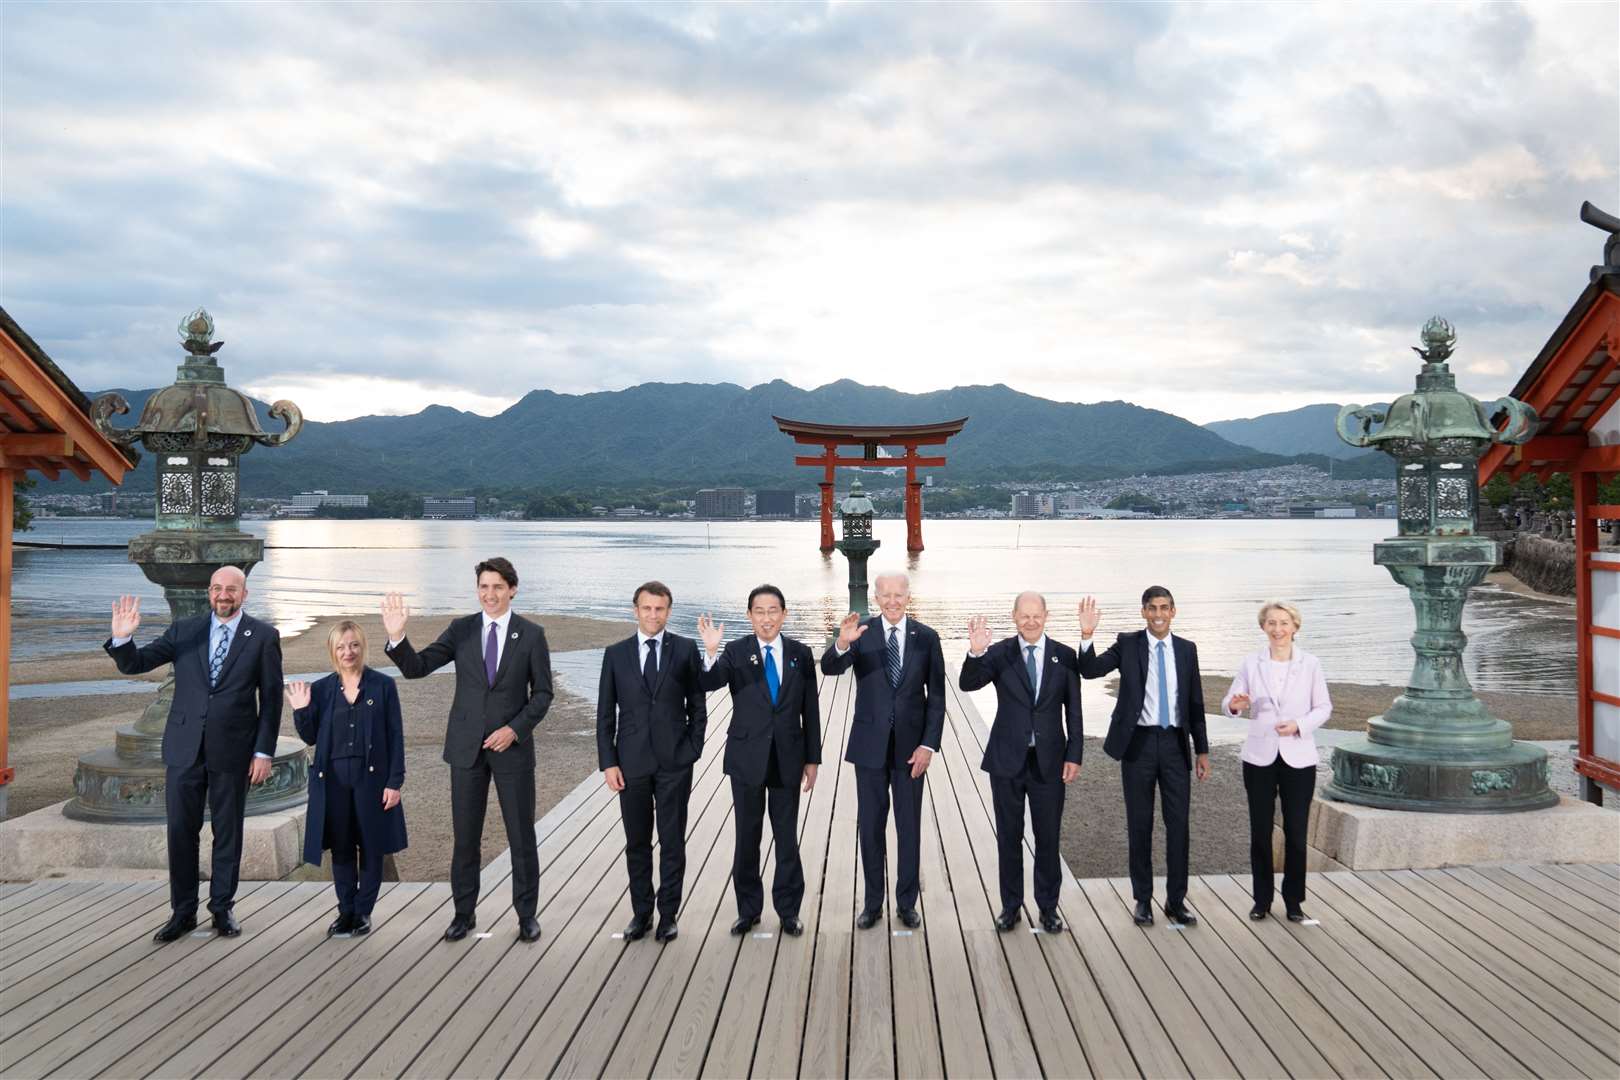 World leaders, including Prime Minister Rishi Sunak and European Commission President Ursula von der Leyen, pose at the Itsukushima Shrine during the G7 Summit in Hiroshima, Japan (Stefan Rousseau/PA)